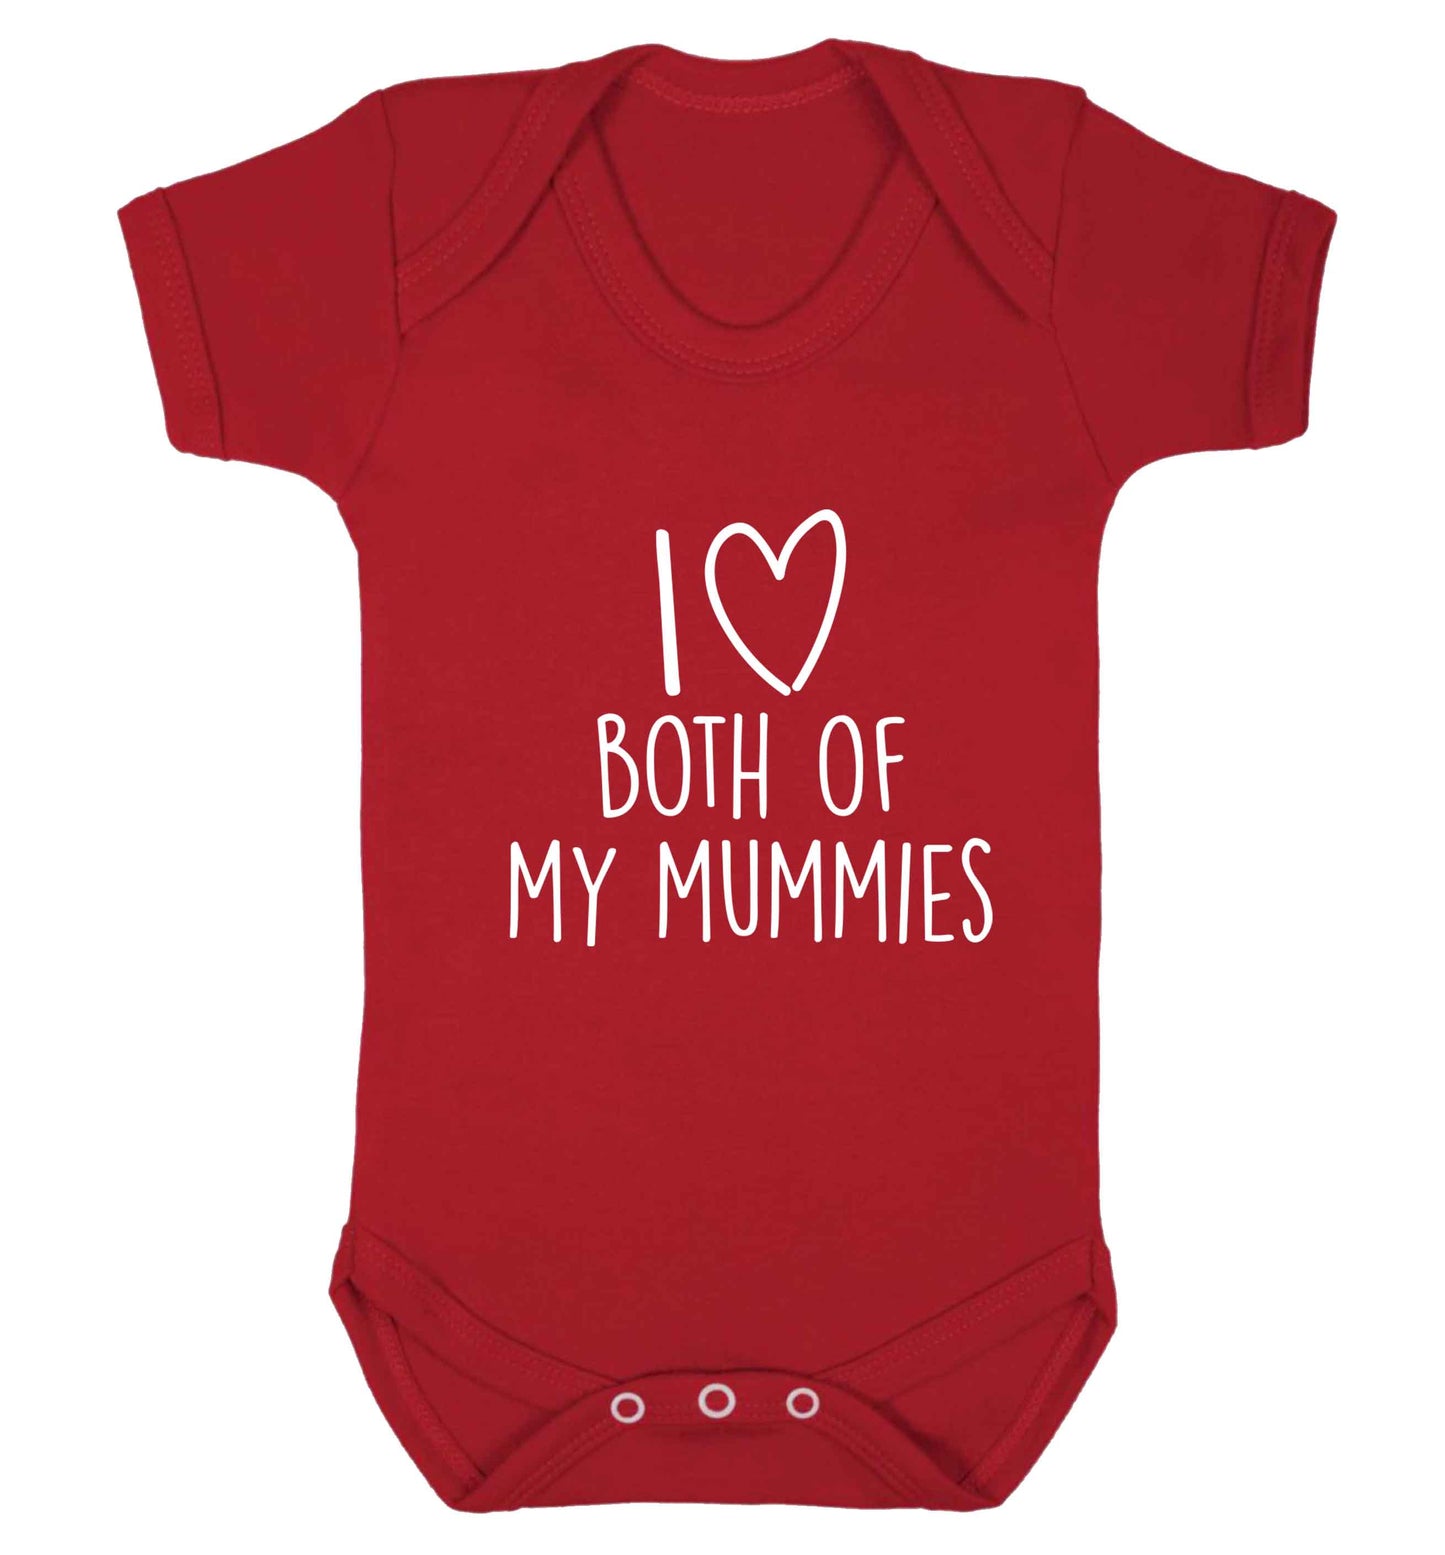 I love both of my mummies baby vest red 18-24 months